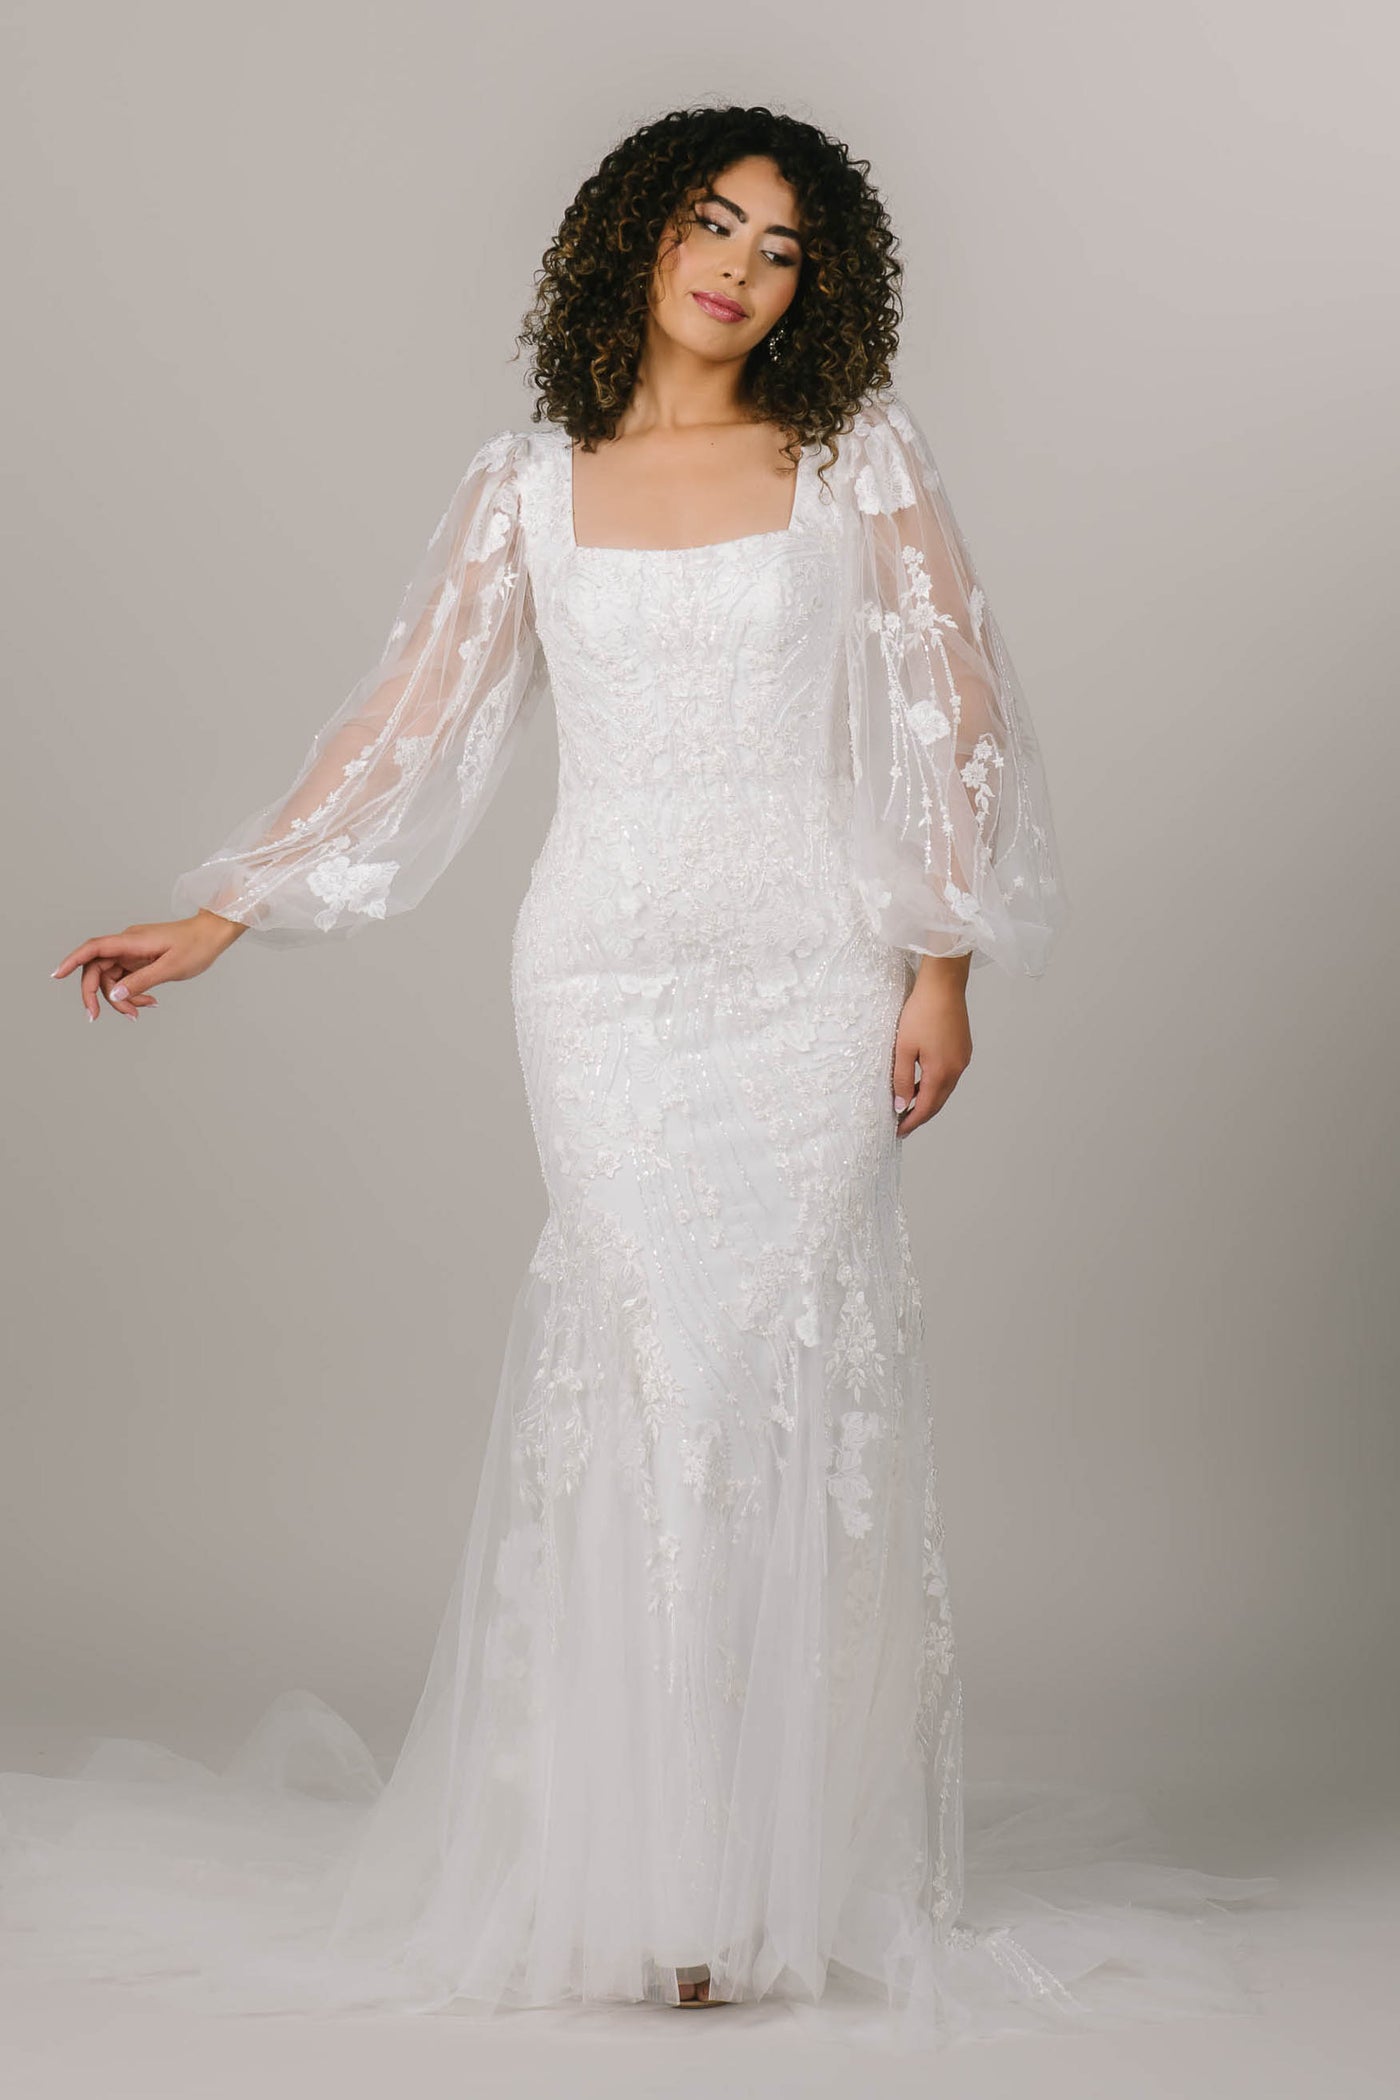 This is an alternate shot of a modest wedding dress with lace balloon sleeves and a square neckline.